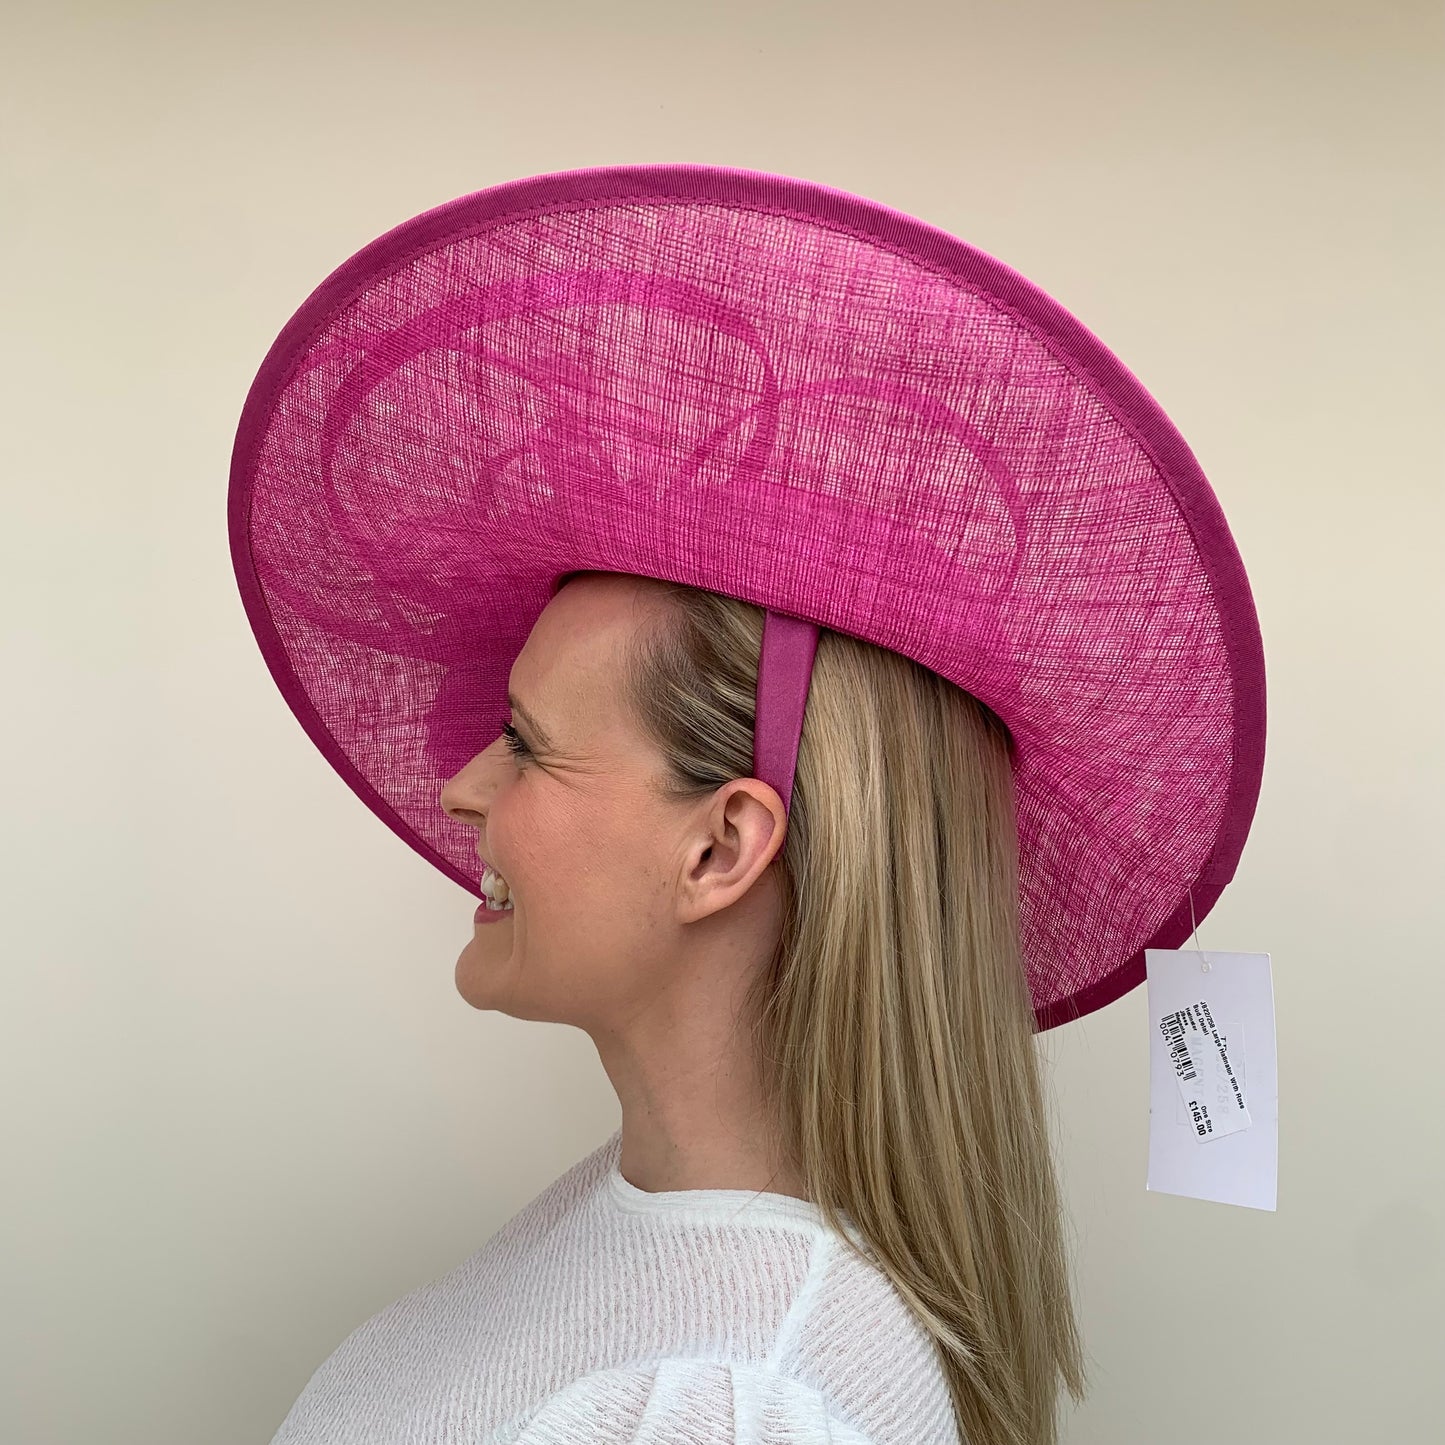 J Bees JB22/258 Large Hatinator in Pinks